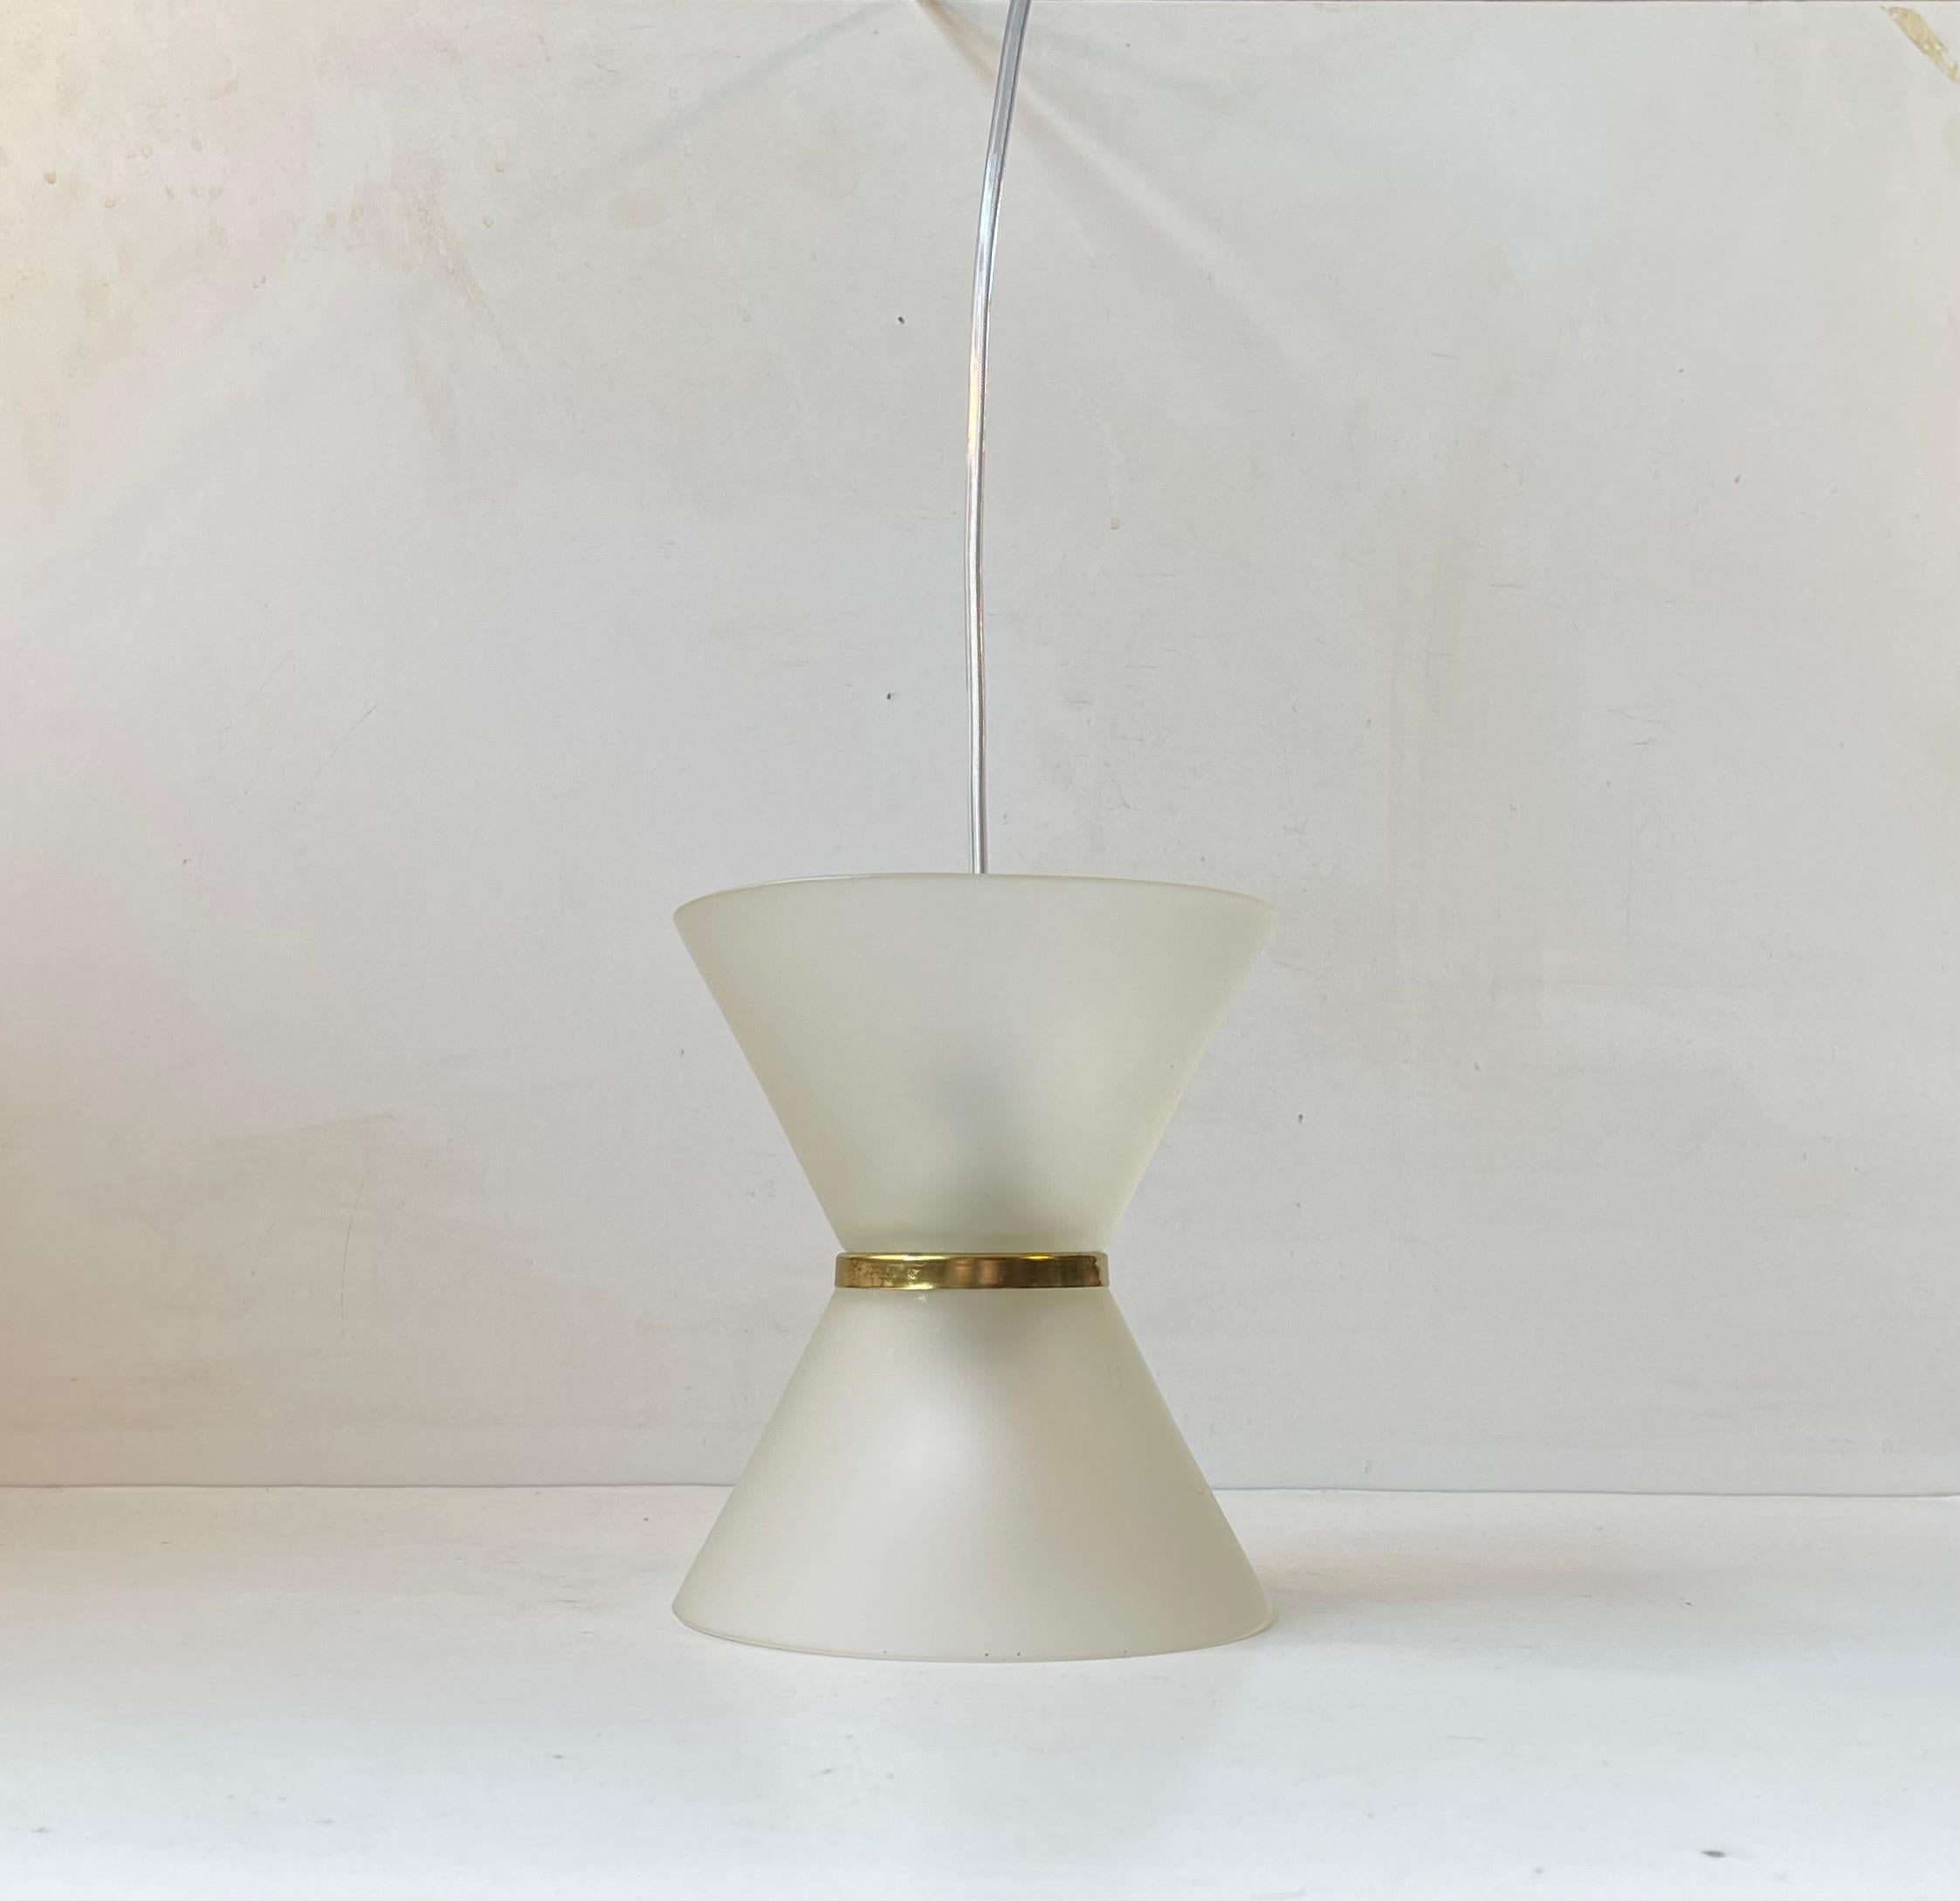 Small Diablo shaped Frosted glass hanging lamp. Anonymous danish maker/design - circa 1970-80. Measurements: H: 17 cm, Diameter: 14.5 cm. 3 meters new white wire installed and bulb included.

   